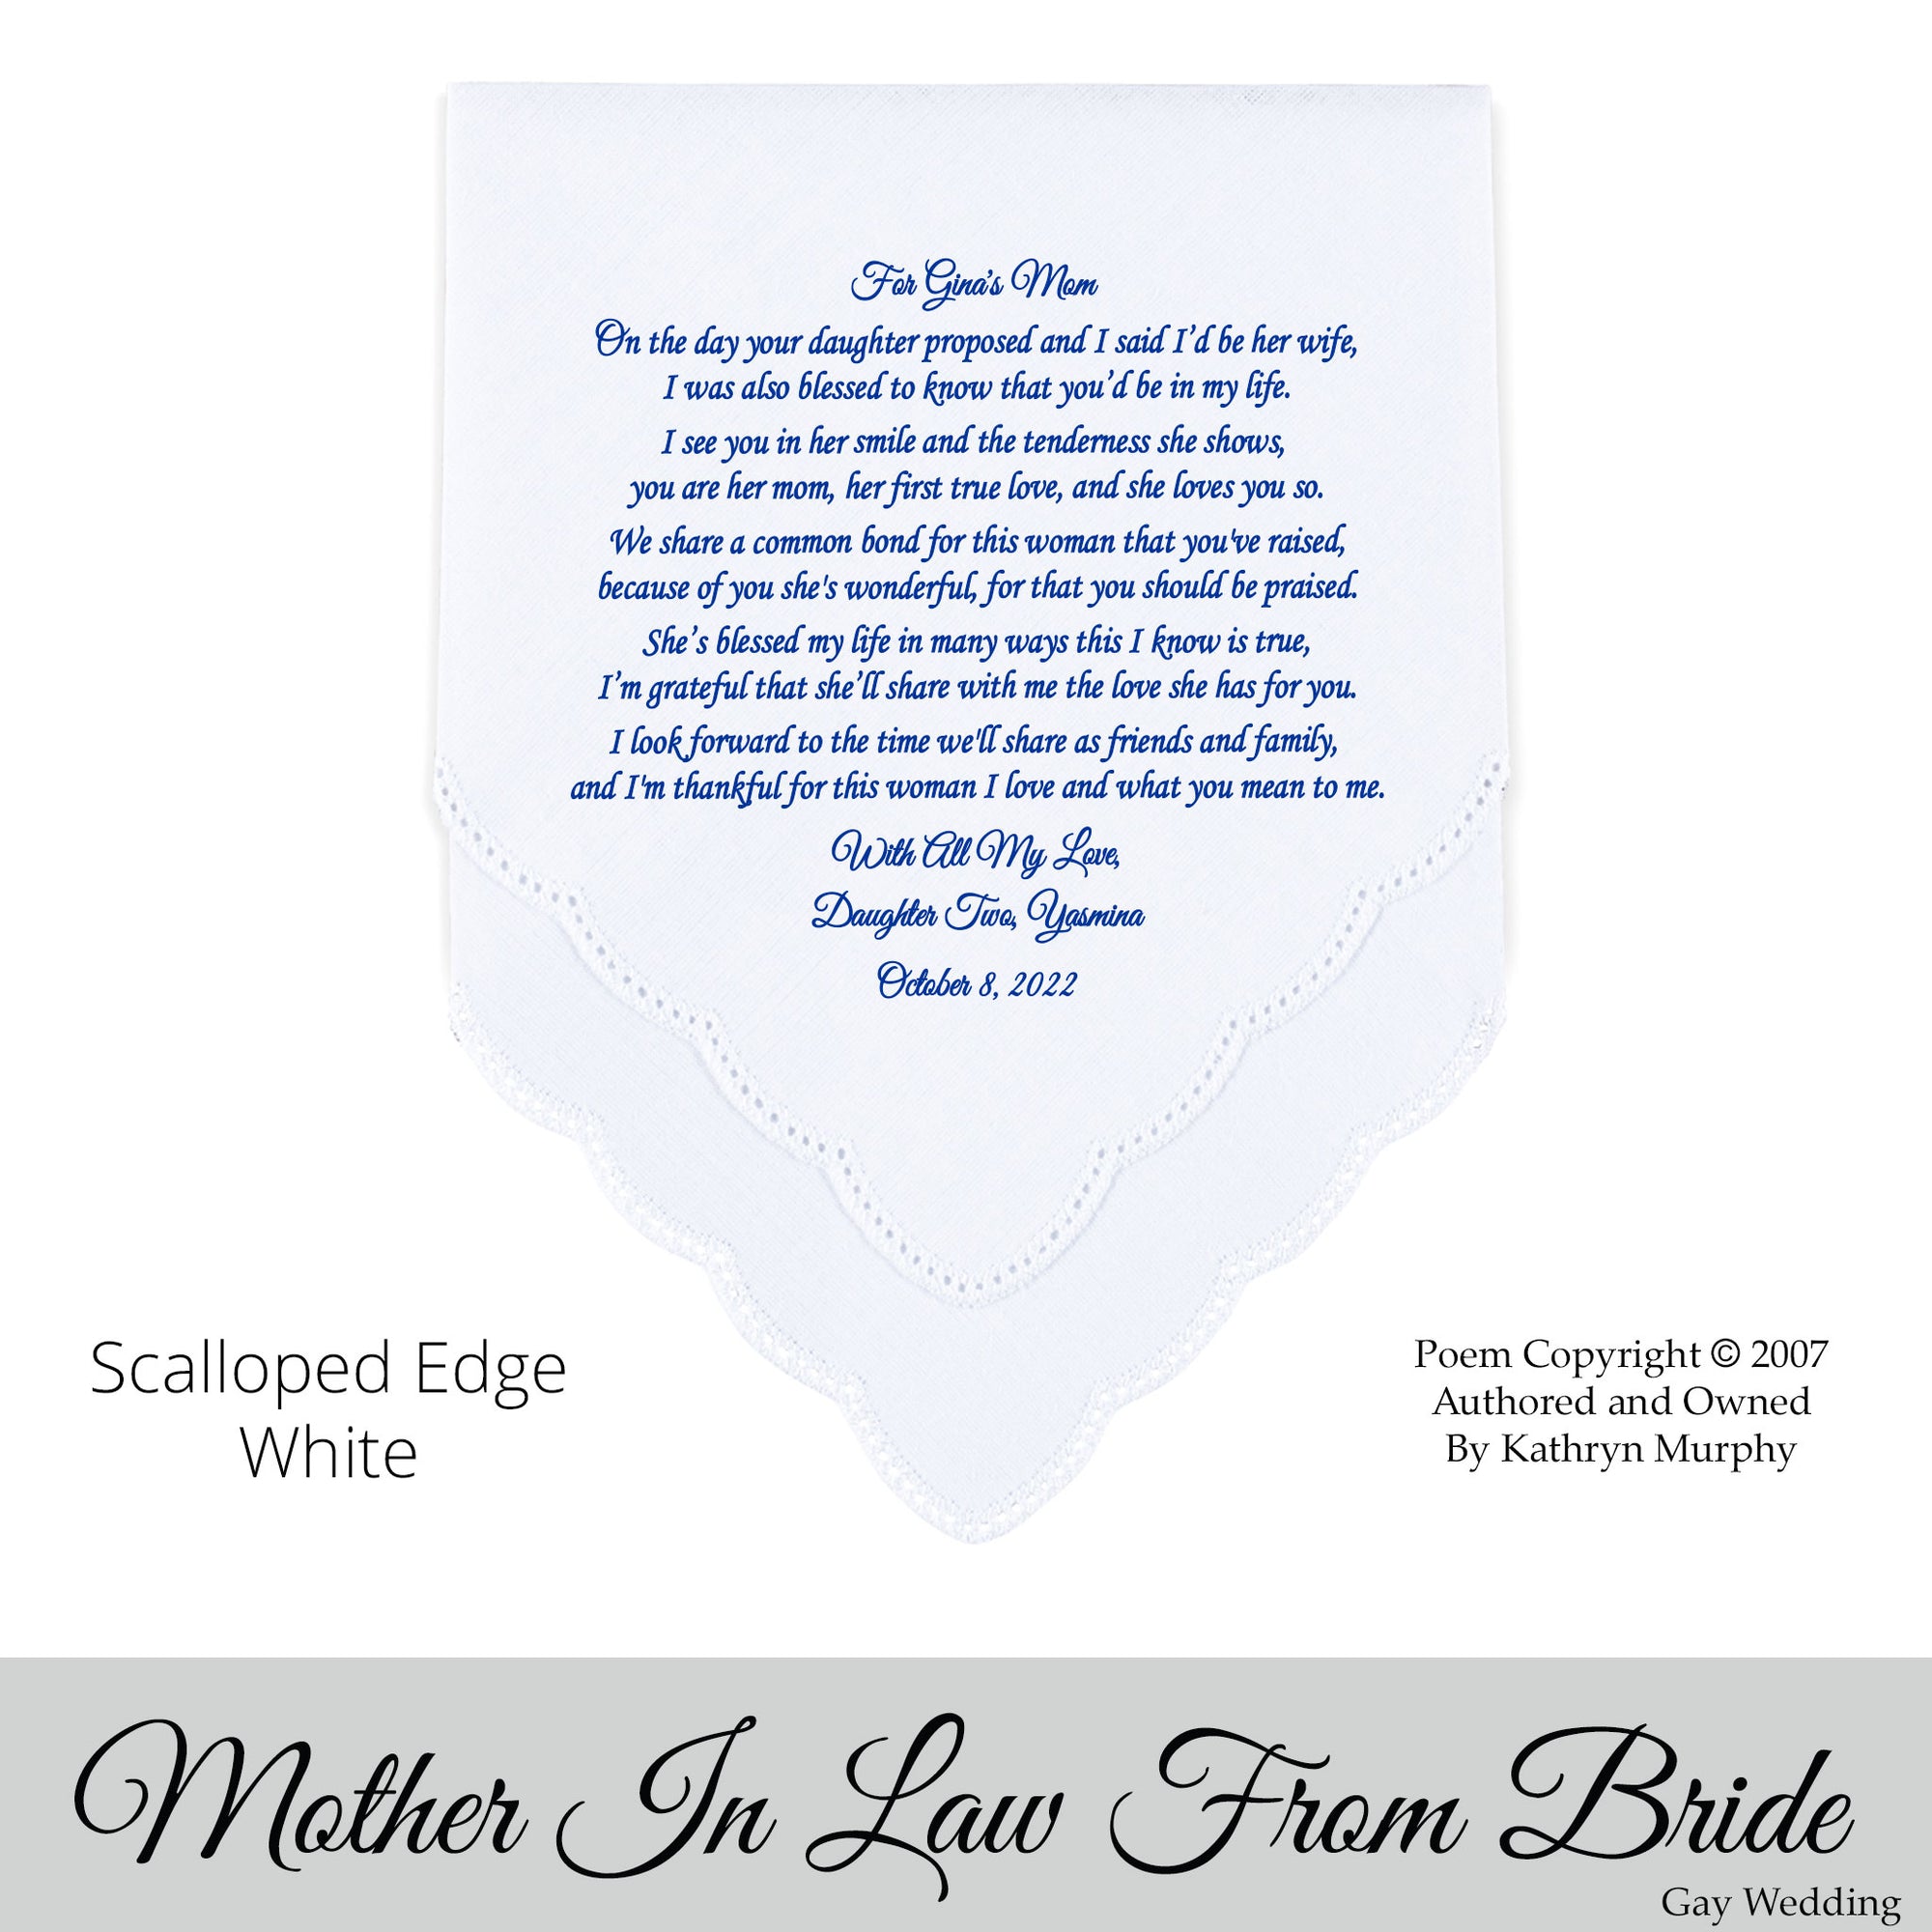 Gay Wedding Gift for the Mother of the bride poem printed wedding hankie